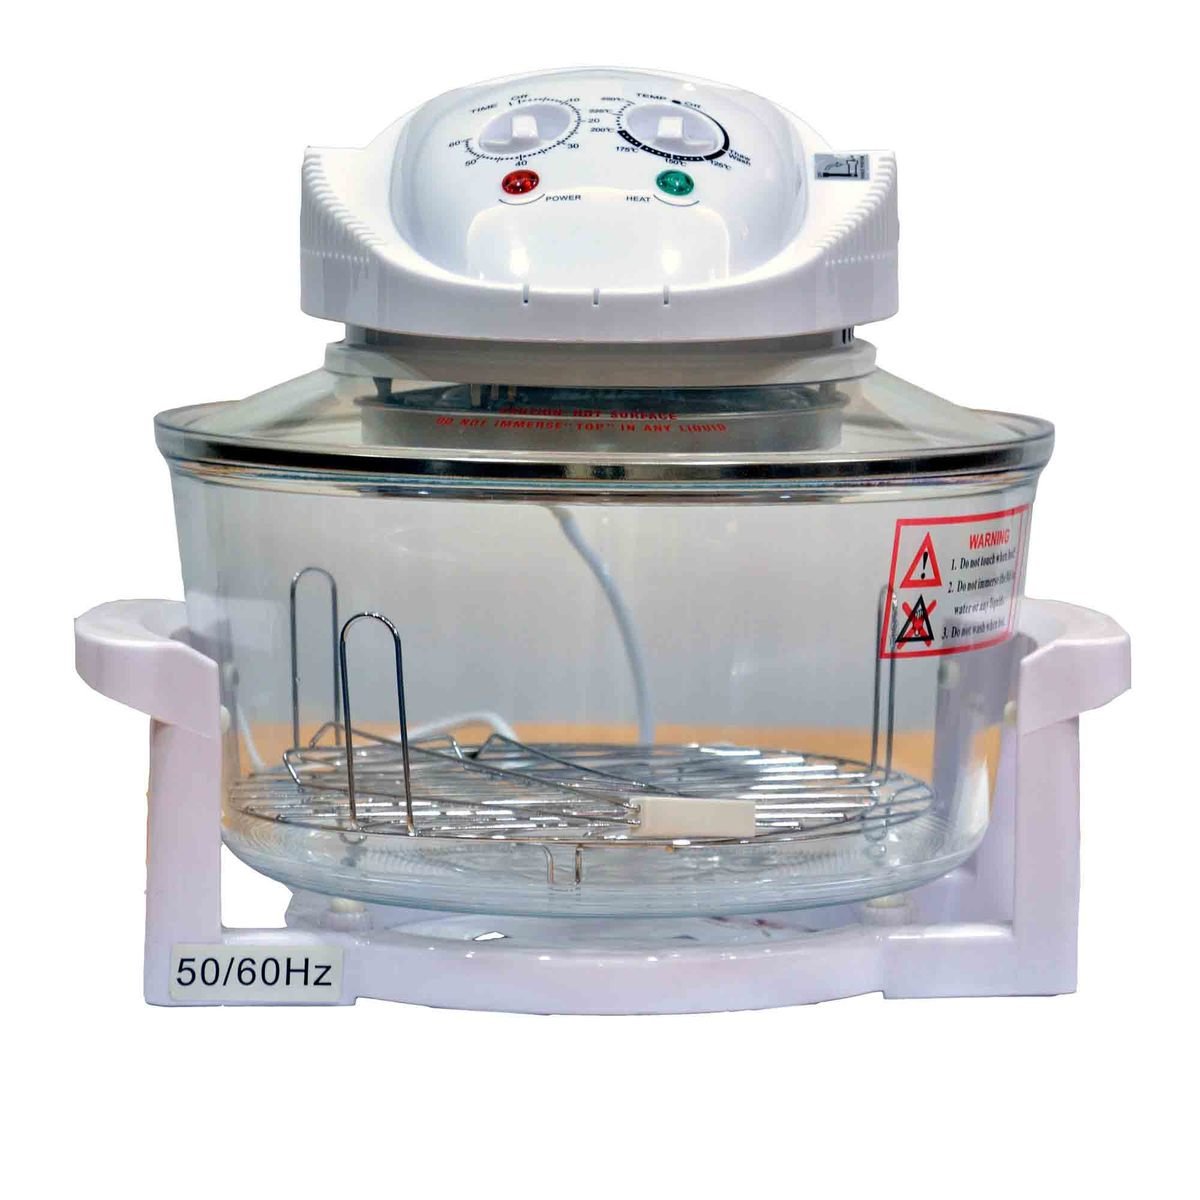 Europa Halogen Oven FHO-F11